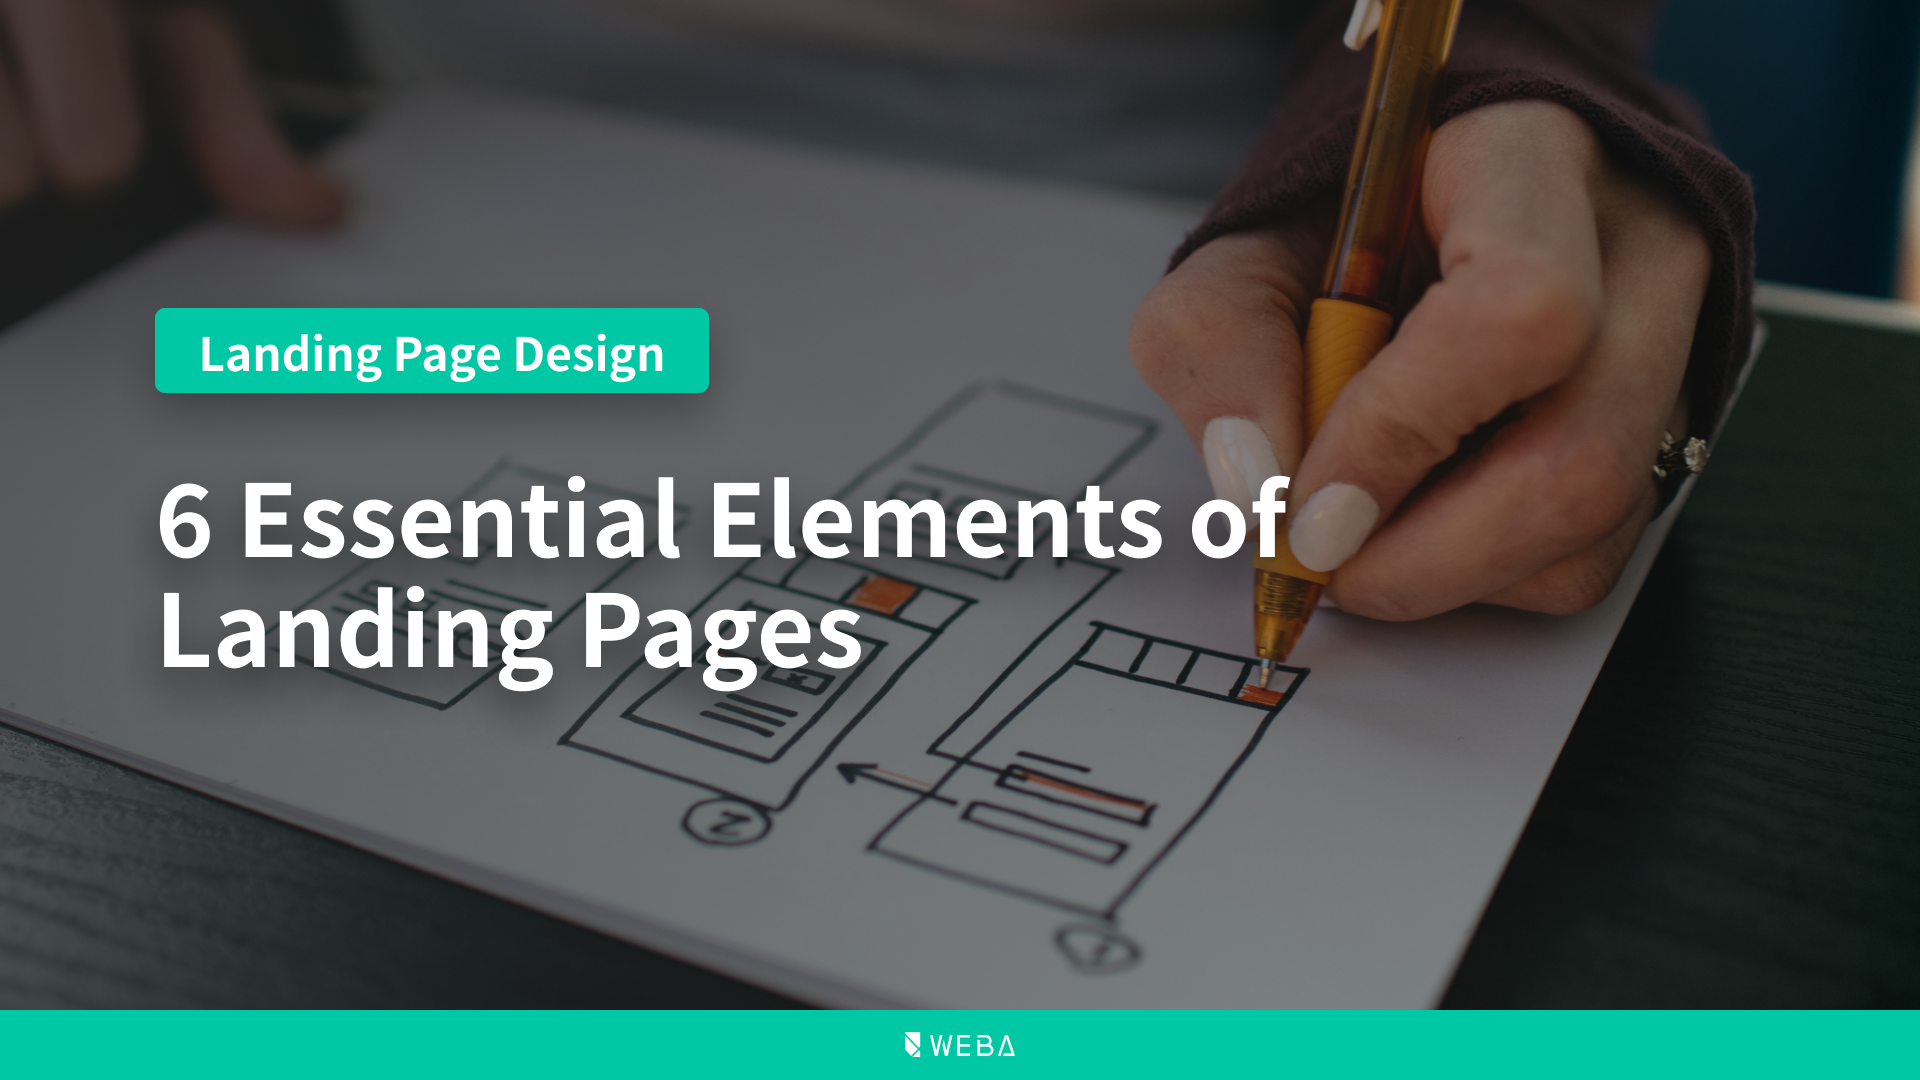 Landing Pages Design｜6 Essential Elements of Landing Pages